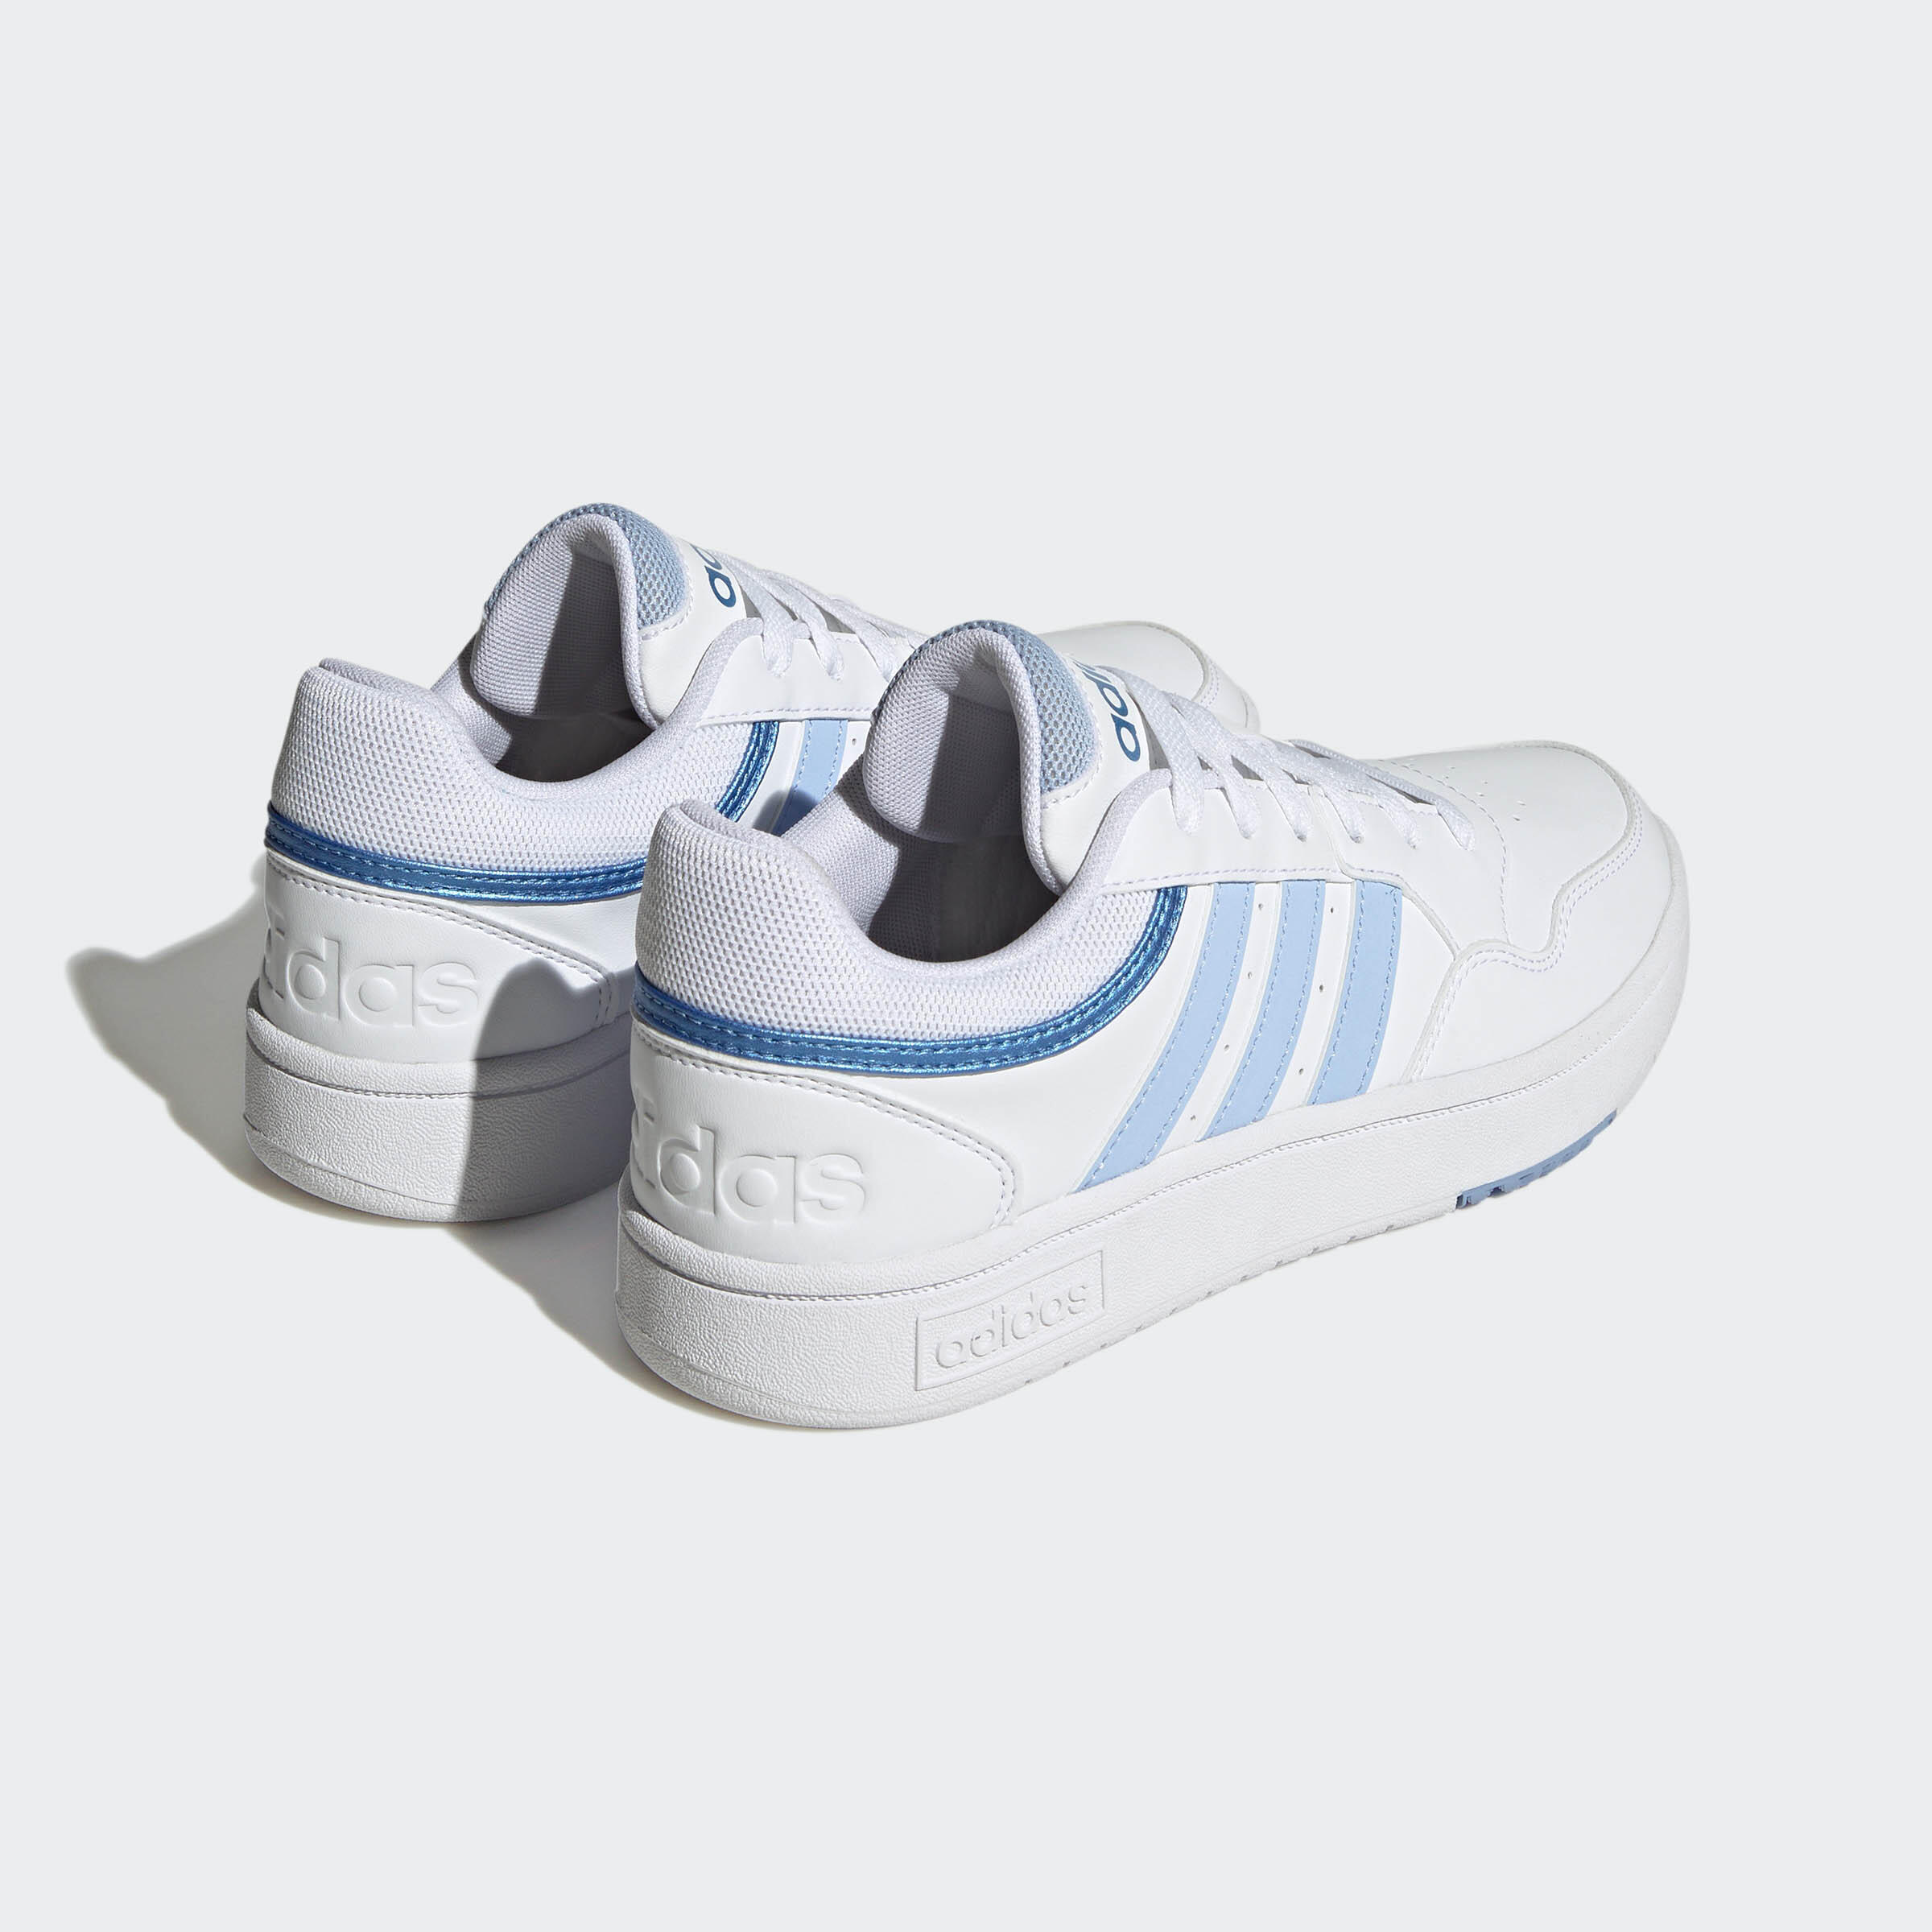 WOMEN'S ADIDAS HOOPS 3.0 SHOES - WHITE 4/5